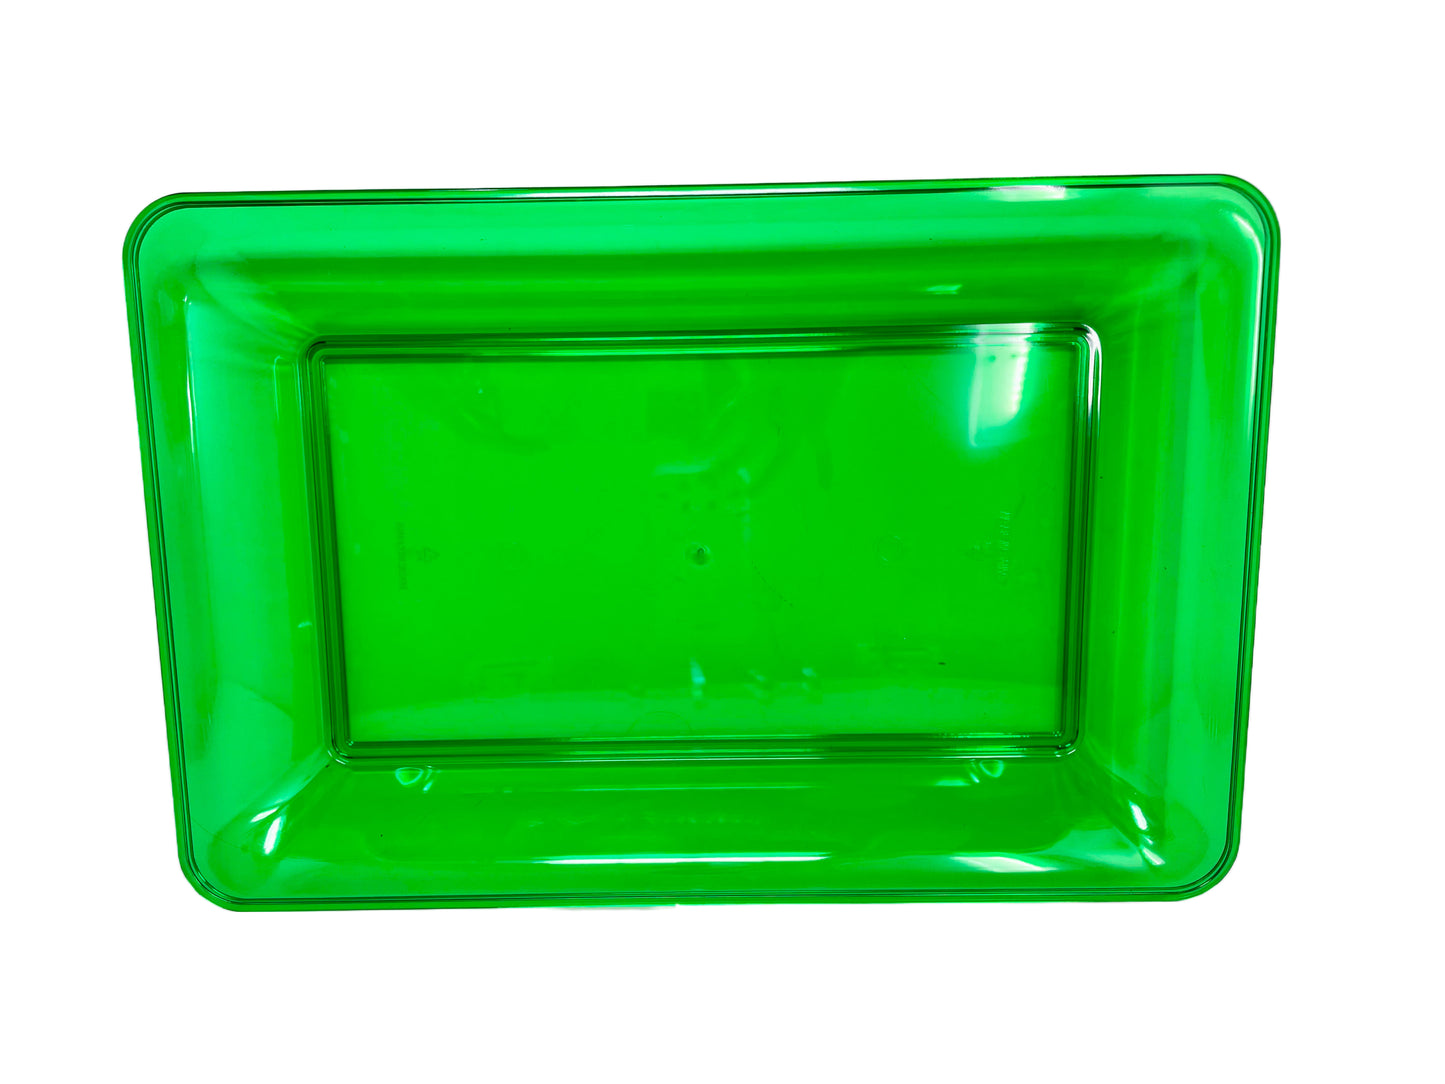 Christmas Green Translucent Partyware Set, Serves Up To 20, 90 Pcs